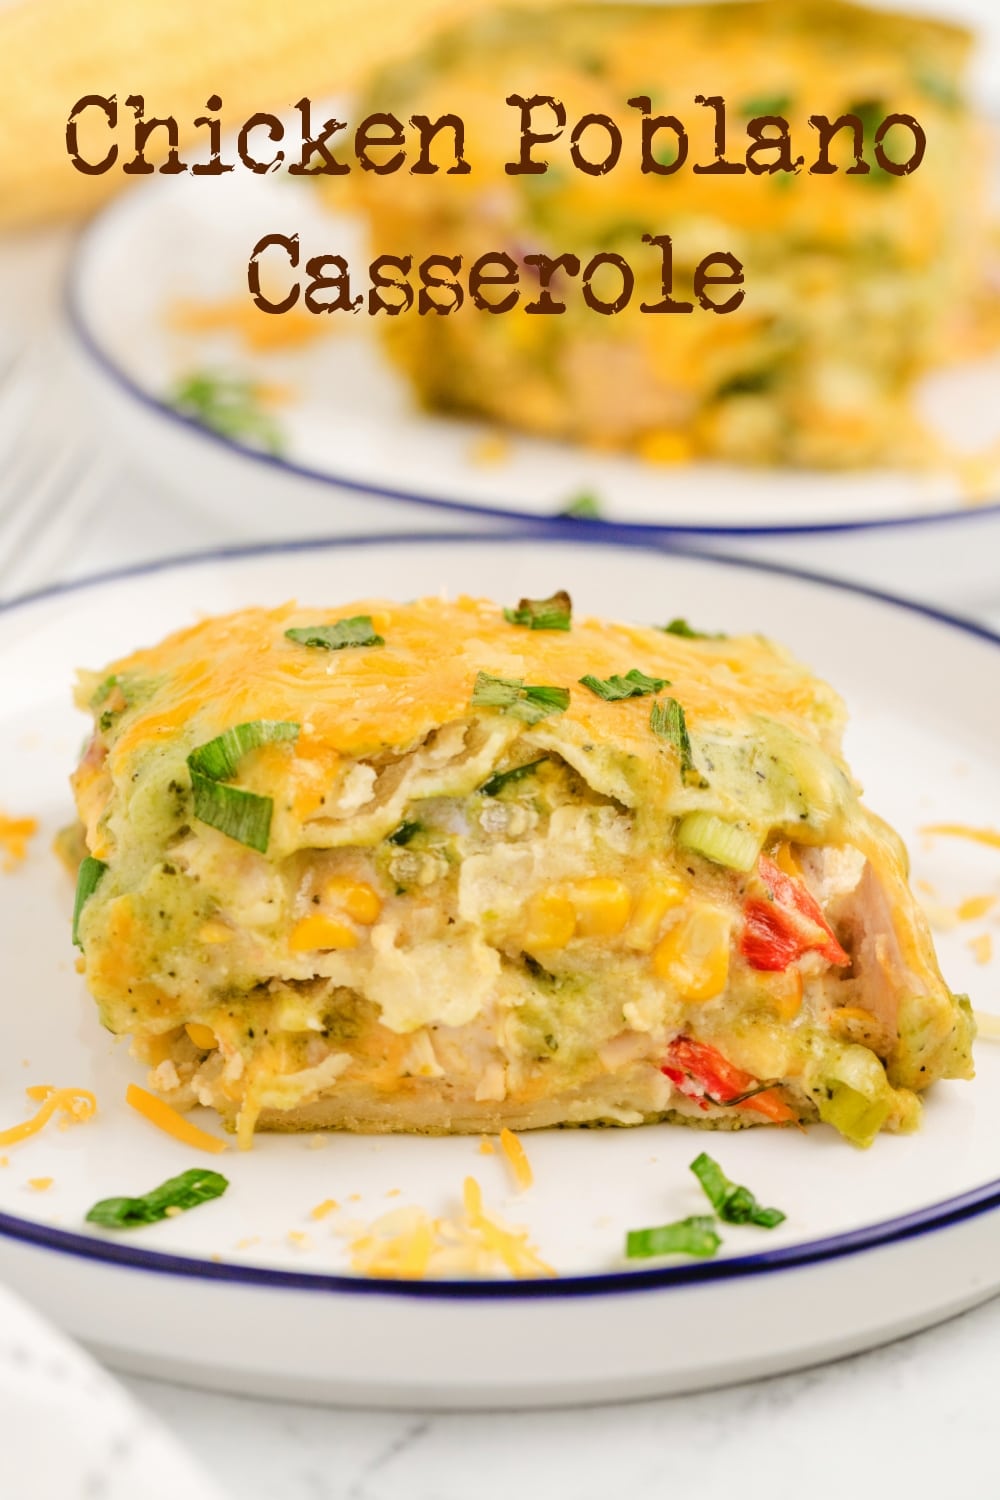 This Chicken Poblano Casserole brings together a creamy, roasted poblano sauce, juicy chicken, gooey cheeses and layers of tortillas that deliver an enchilada-inspired dinner creation you're going to love. This cheesy casserole effortlessly transitions from a comforting weeknight dinner to a show-stopping, flavor-packed dish for festive celebrations. via @cmpollak1